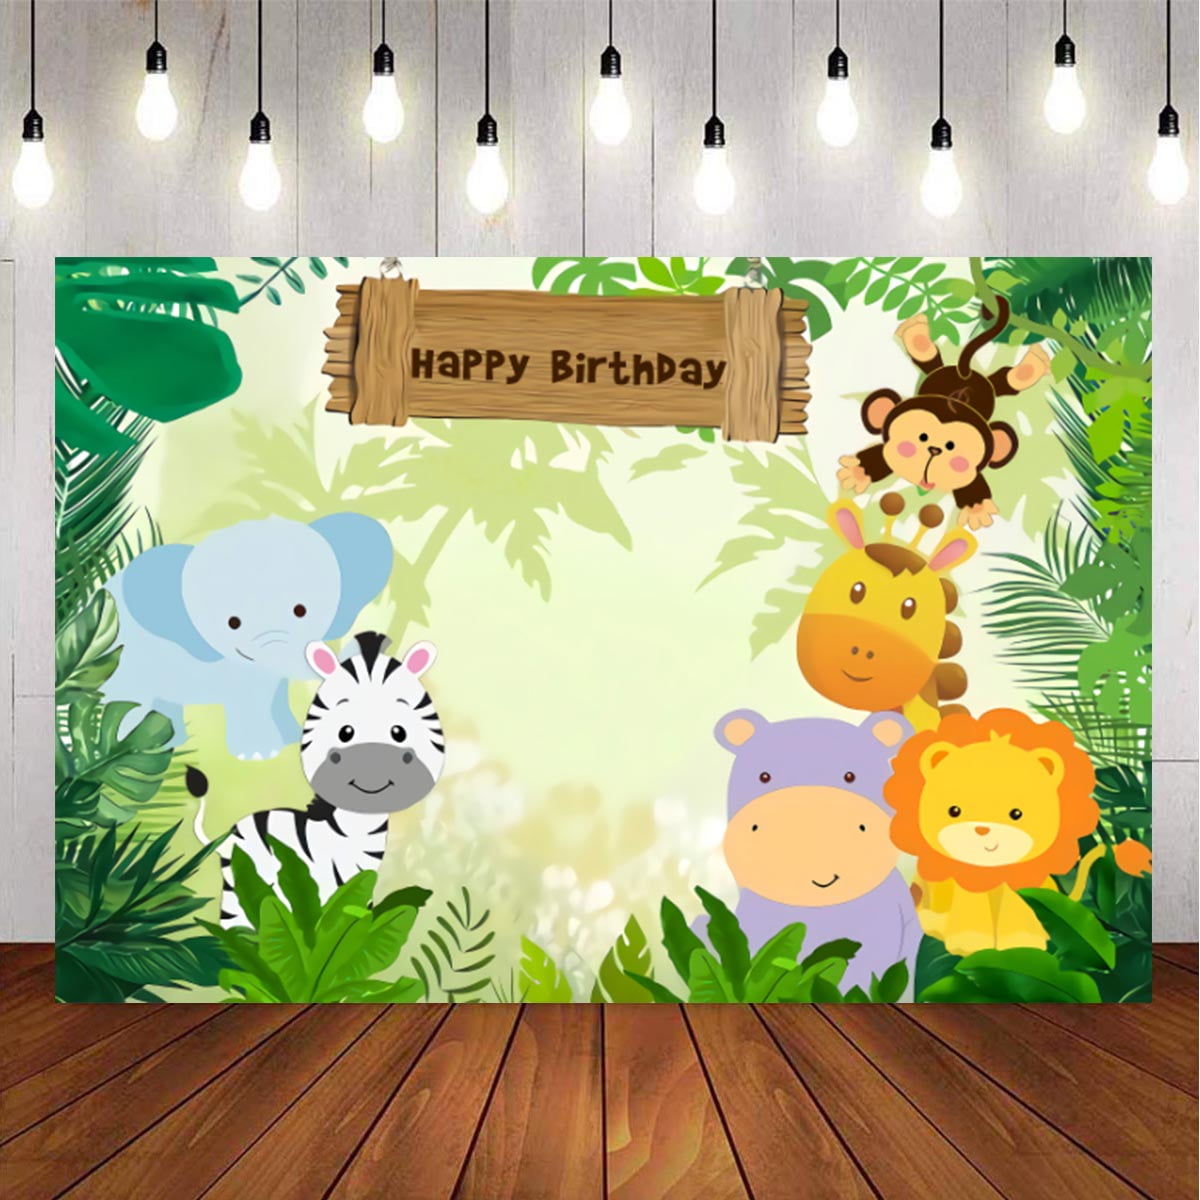 Ocean Cartoon Children 3D Photo Background Party Backdrop The World at The Bottom of Ocean Print Photography Backdrop Mural Wall Backdrop for Studio Photo Booth 15090cm